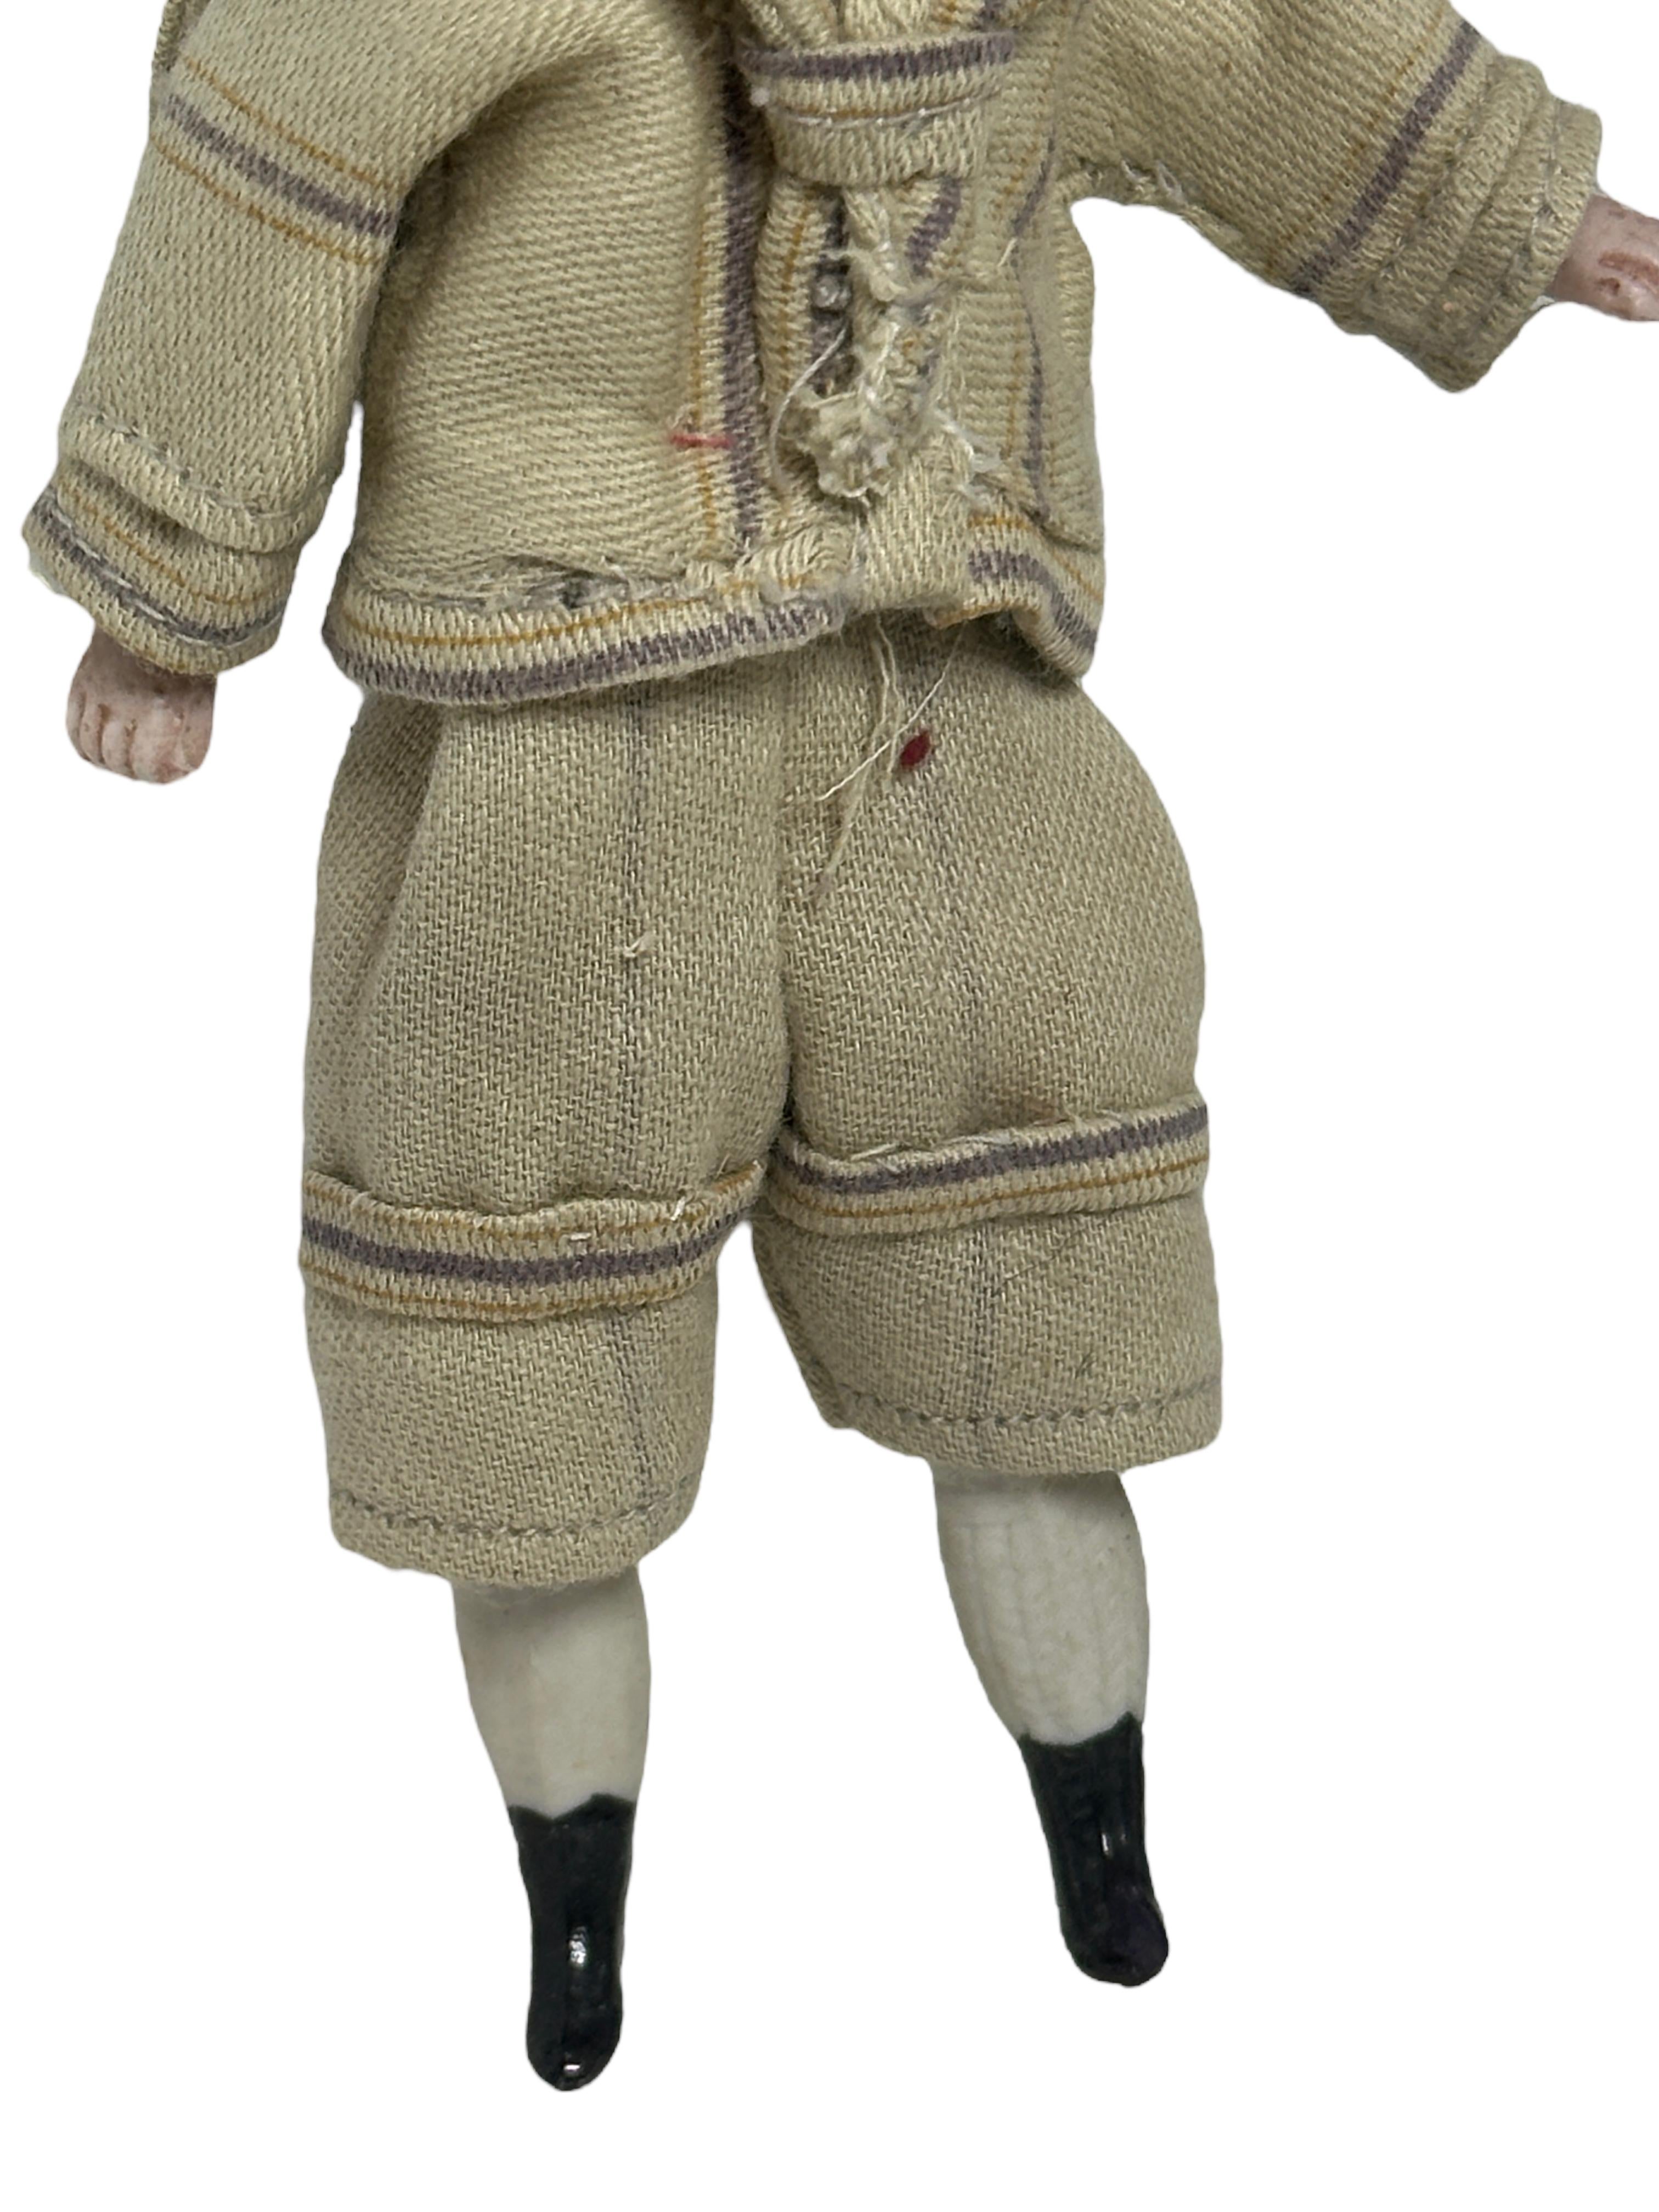 Hand-Crafted Boy dressed in Sailor Outfit Antique German Dollhouse Doll Toy 1900s For Sale